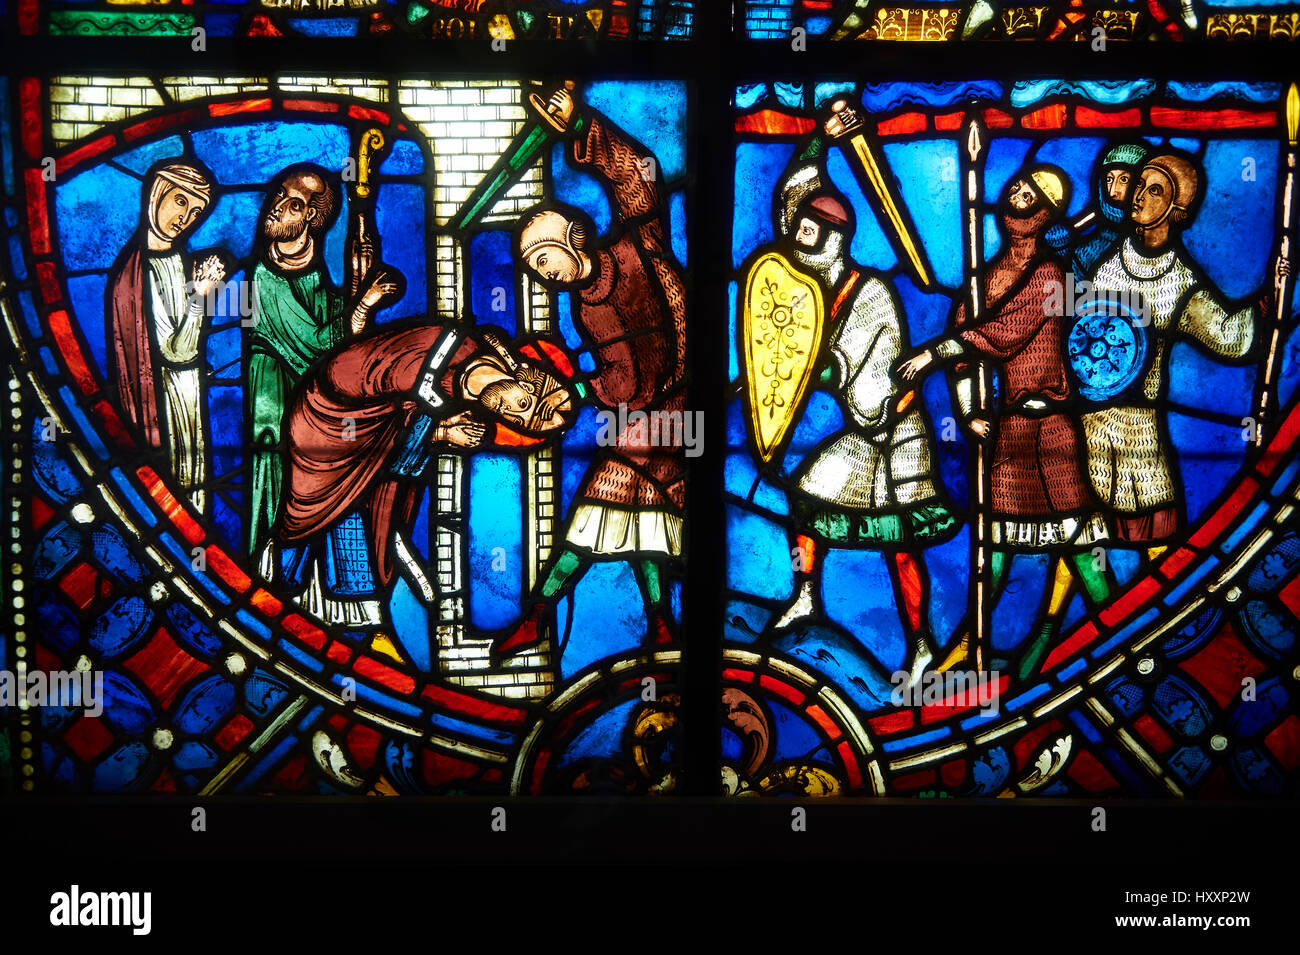 Stained glass windows depicting scenes from the life of Saint Nicaise, 13th century from Cathedral of Soissons.  Inv OA 6006,  The Louvre Museum, Pari Stock Photo